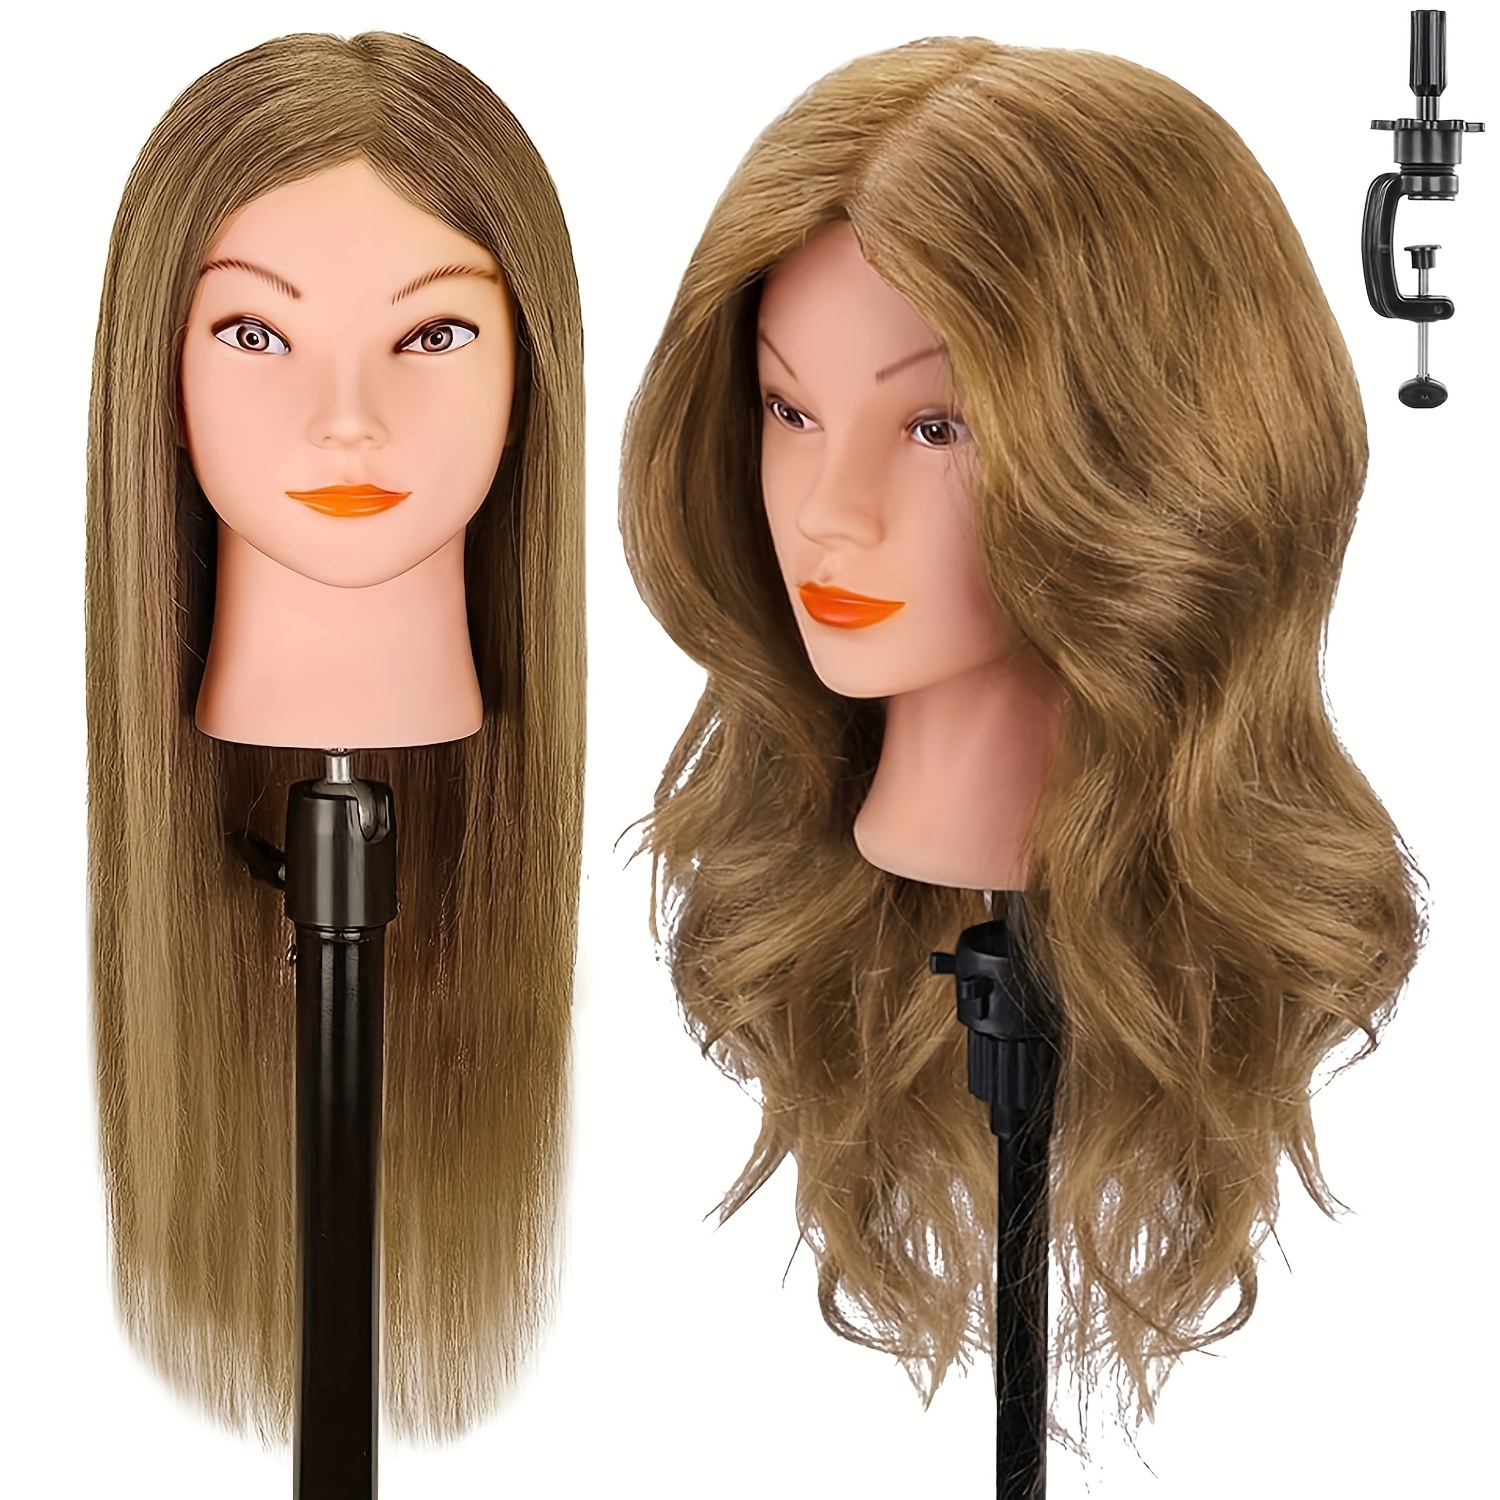 26 Inch Colorful Synthetic Long Hair Hairdressing Cosmetology Training Head  With Stand Mannequin Dummy Practice Manikin Head For Hairstyles +  Hairdressing Tool Set